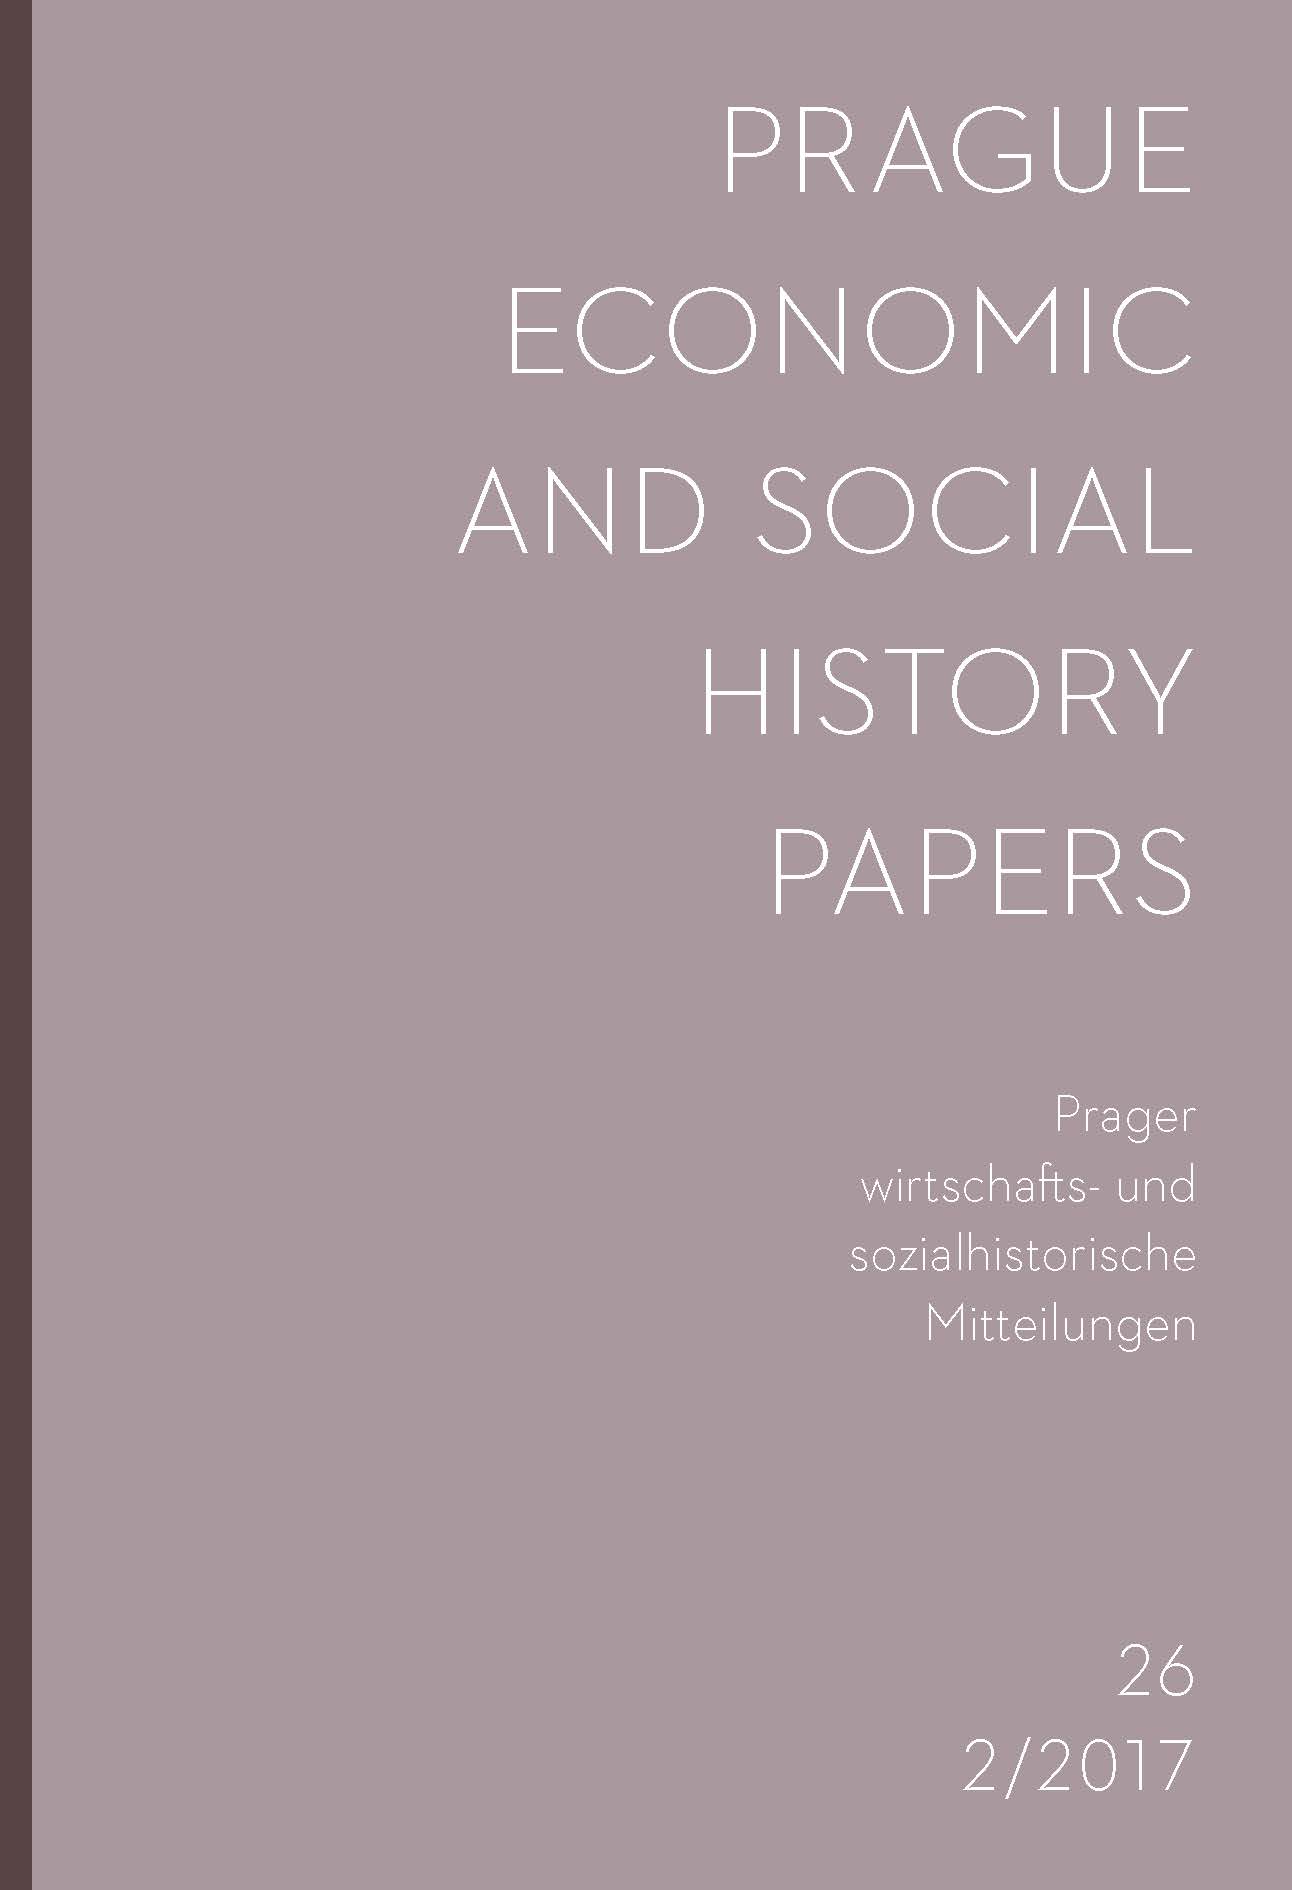 Prague Economic and Social History Papers